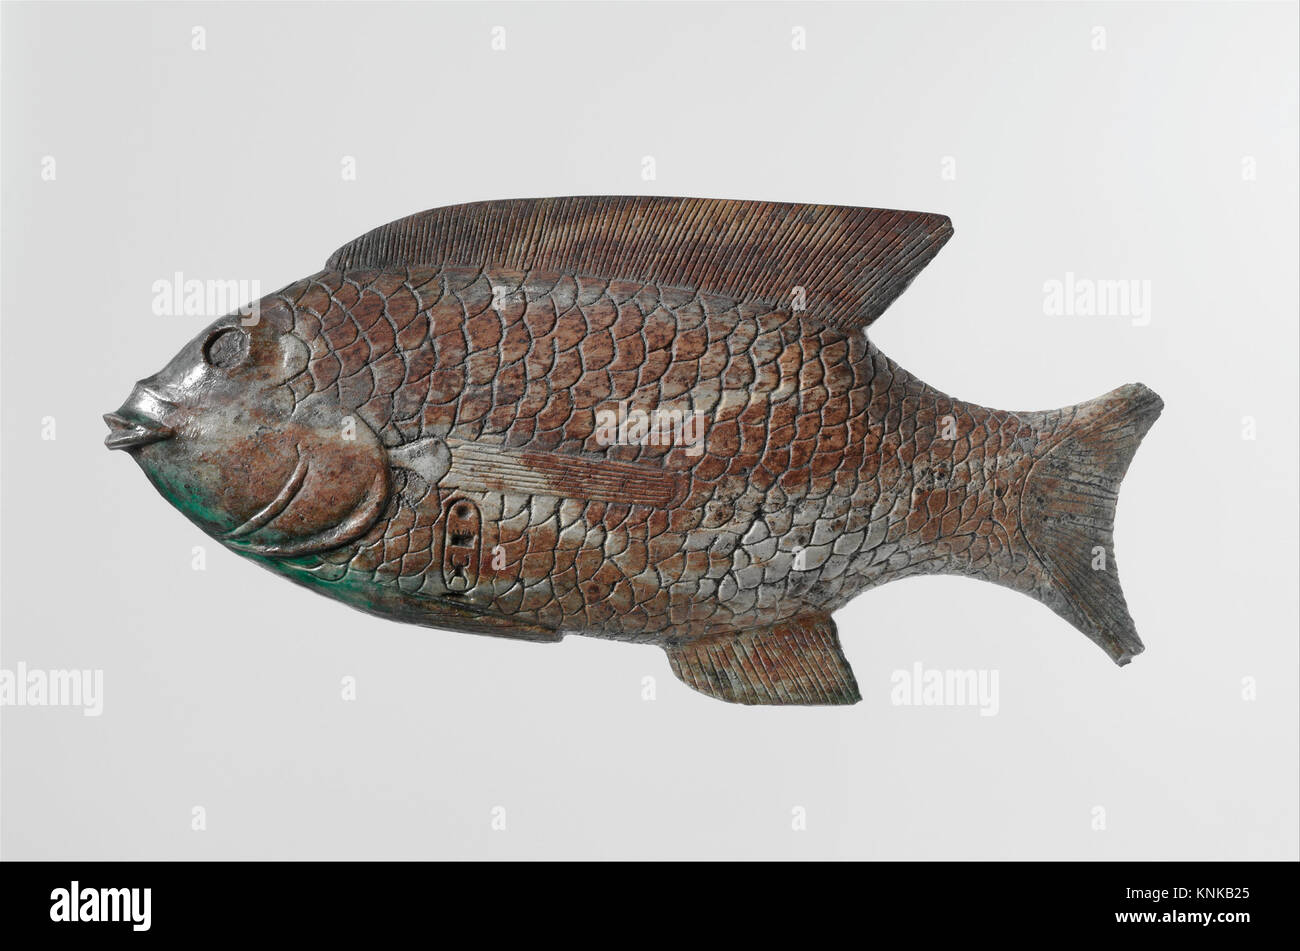 Cosmetic Dish in the Shape of a Bolti Fish, Period New Kingdon, Dynasty 18, Reign of Thutmose III, ca. 1479-1425 B.C., From Egypt, Glazed steatite Stock Photo